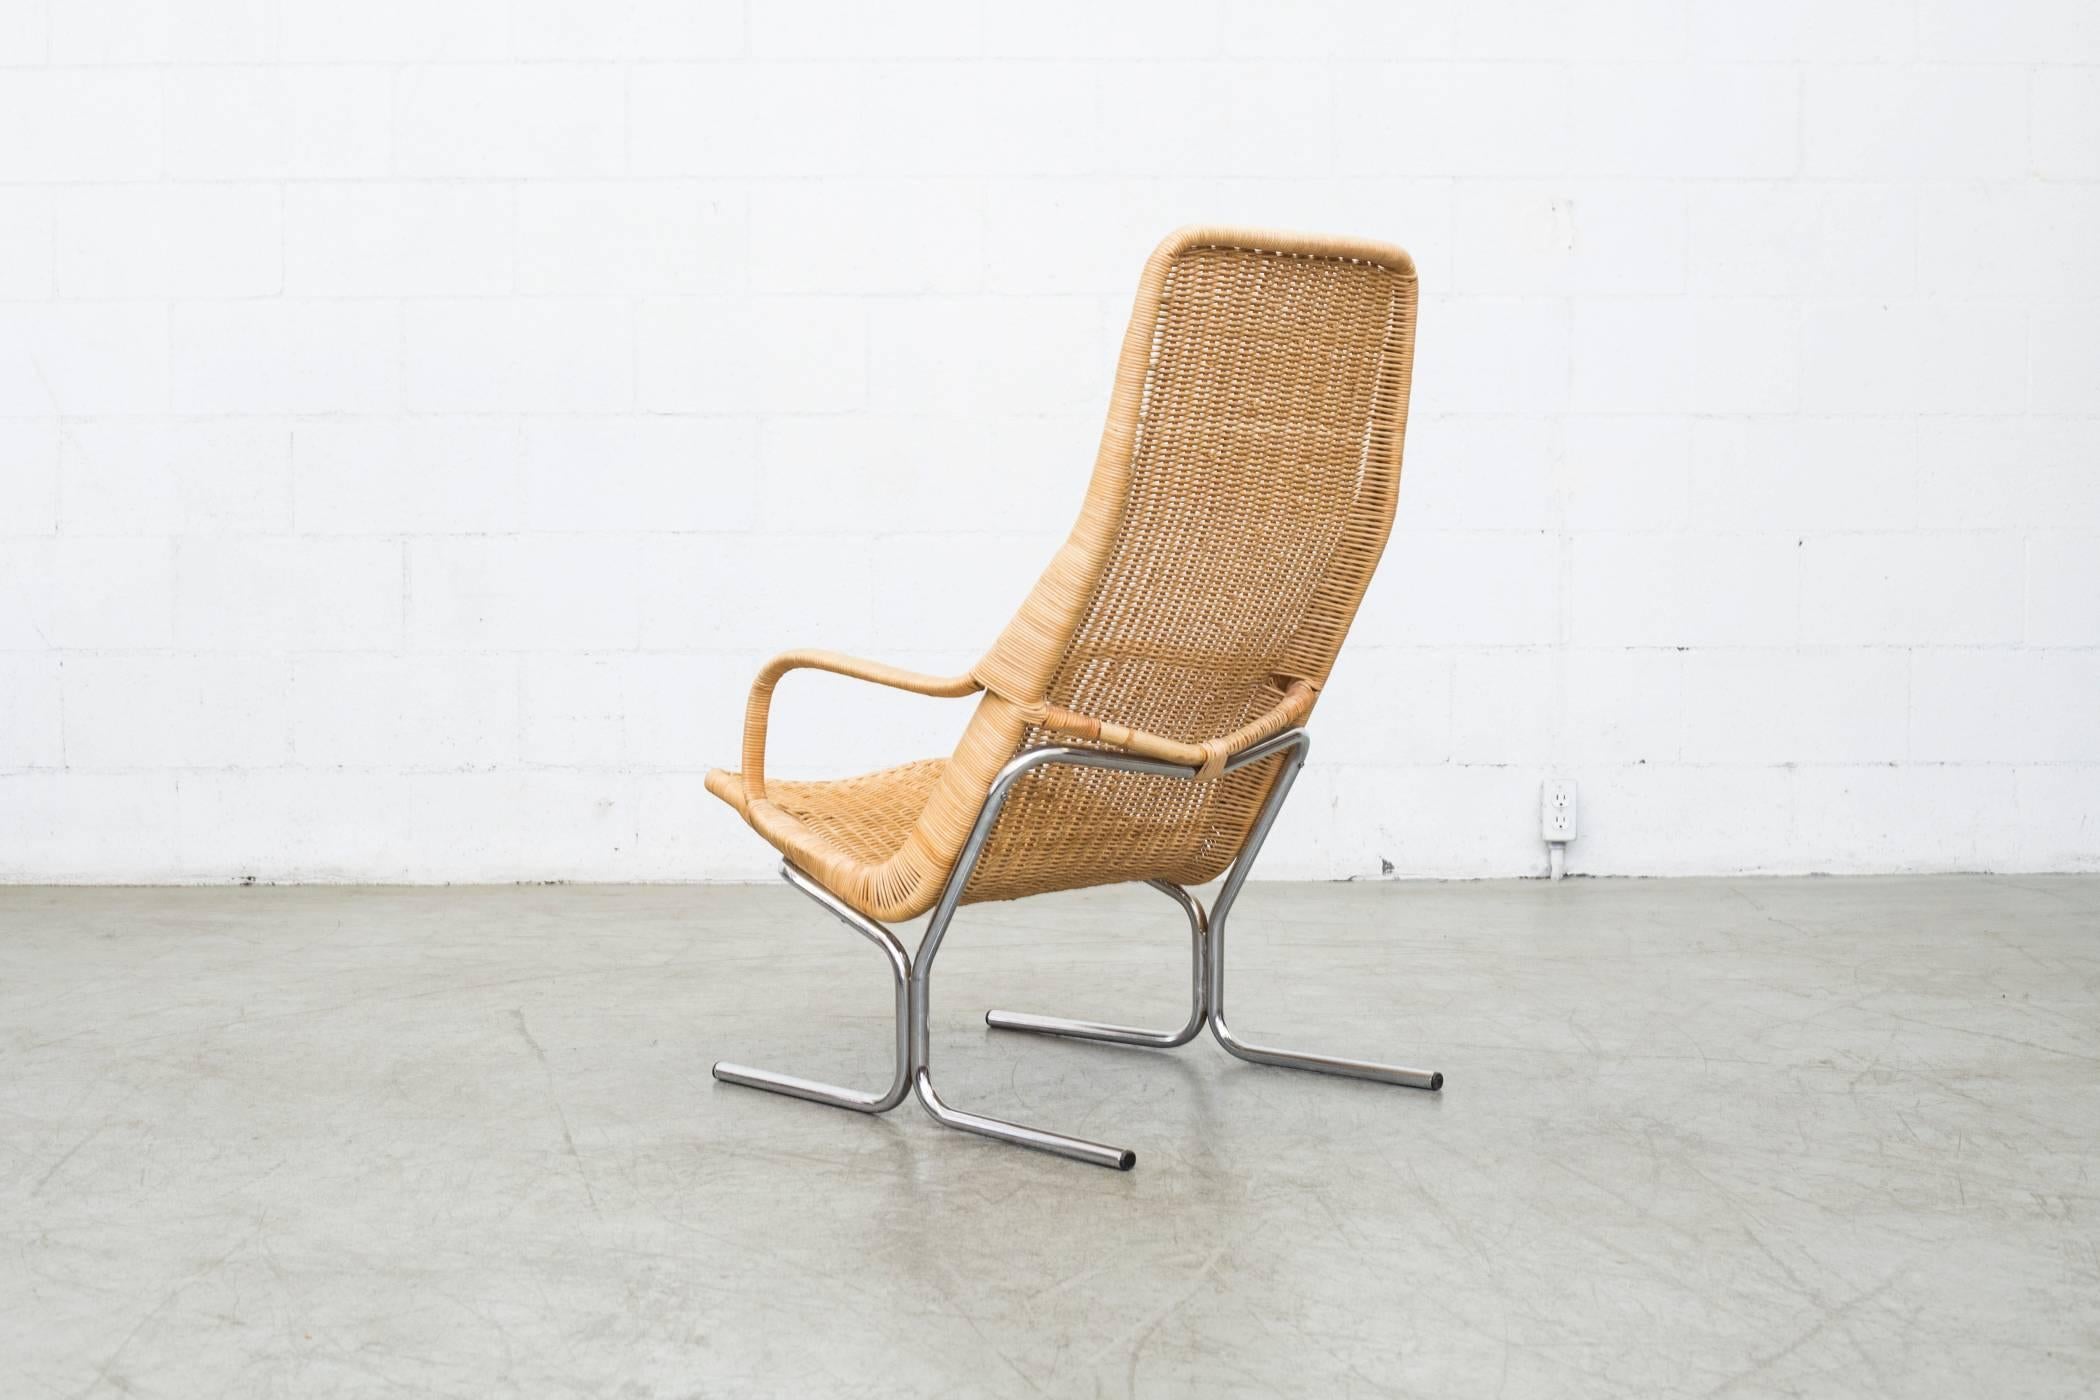 Woven Pair of Dirk Van Sliedrecht Rattan Lounge Chairs with Chrome Sled Frame